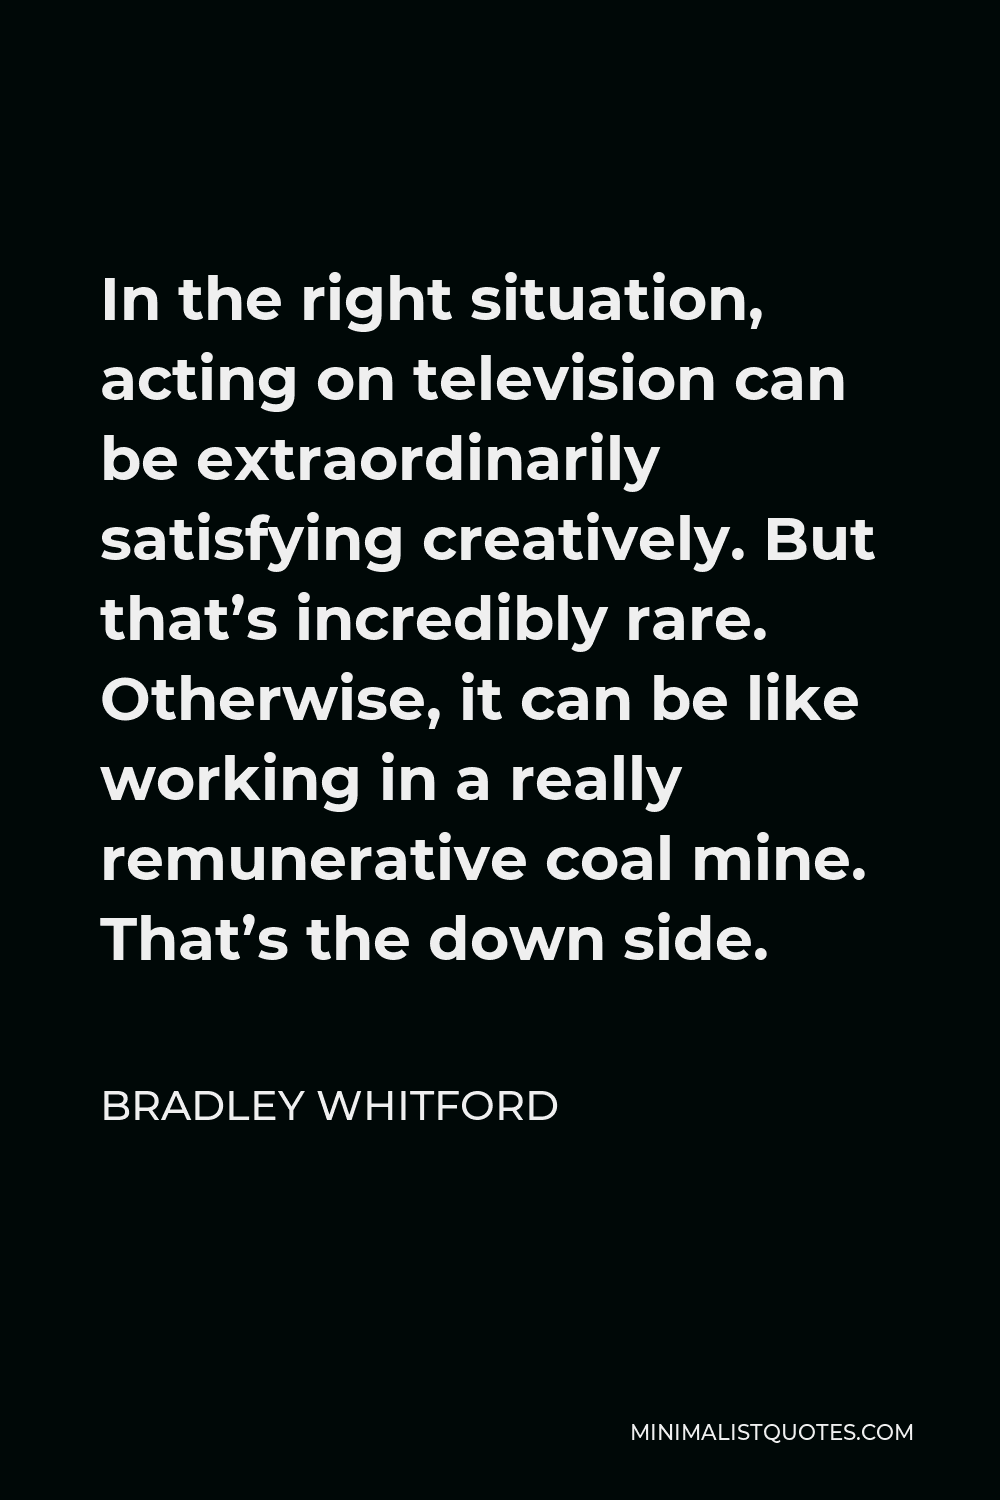 Bradley Whitford Quote - In the right situation, acting on television can be extraordinarily satisfying creatively. But that’s incredibly rare. Otherwise, it can be like working in a really remunerative coal mine. That’s the down side.